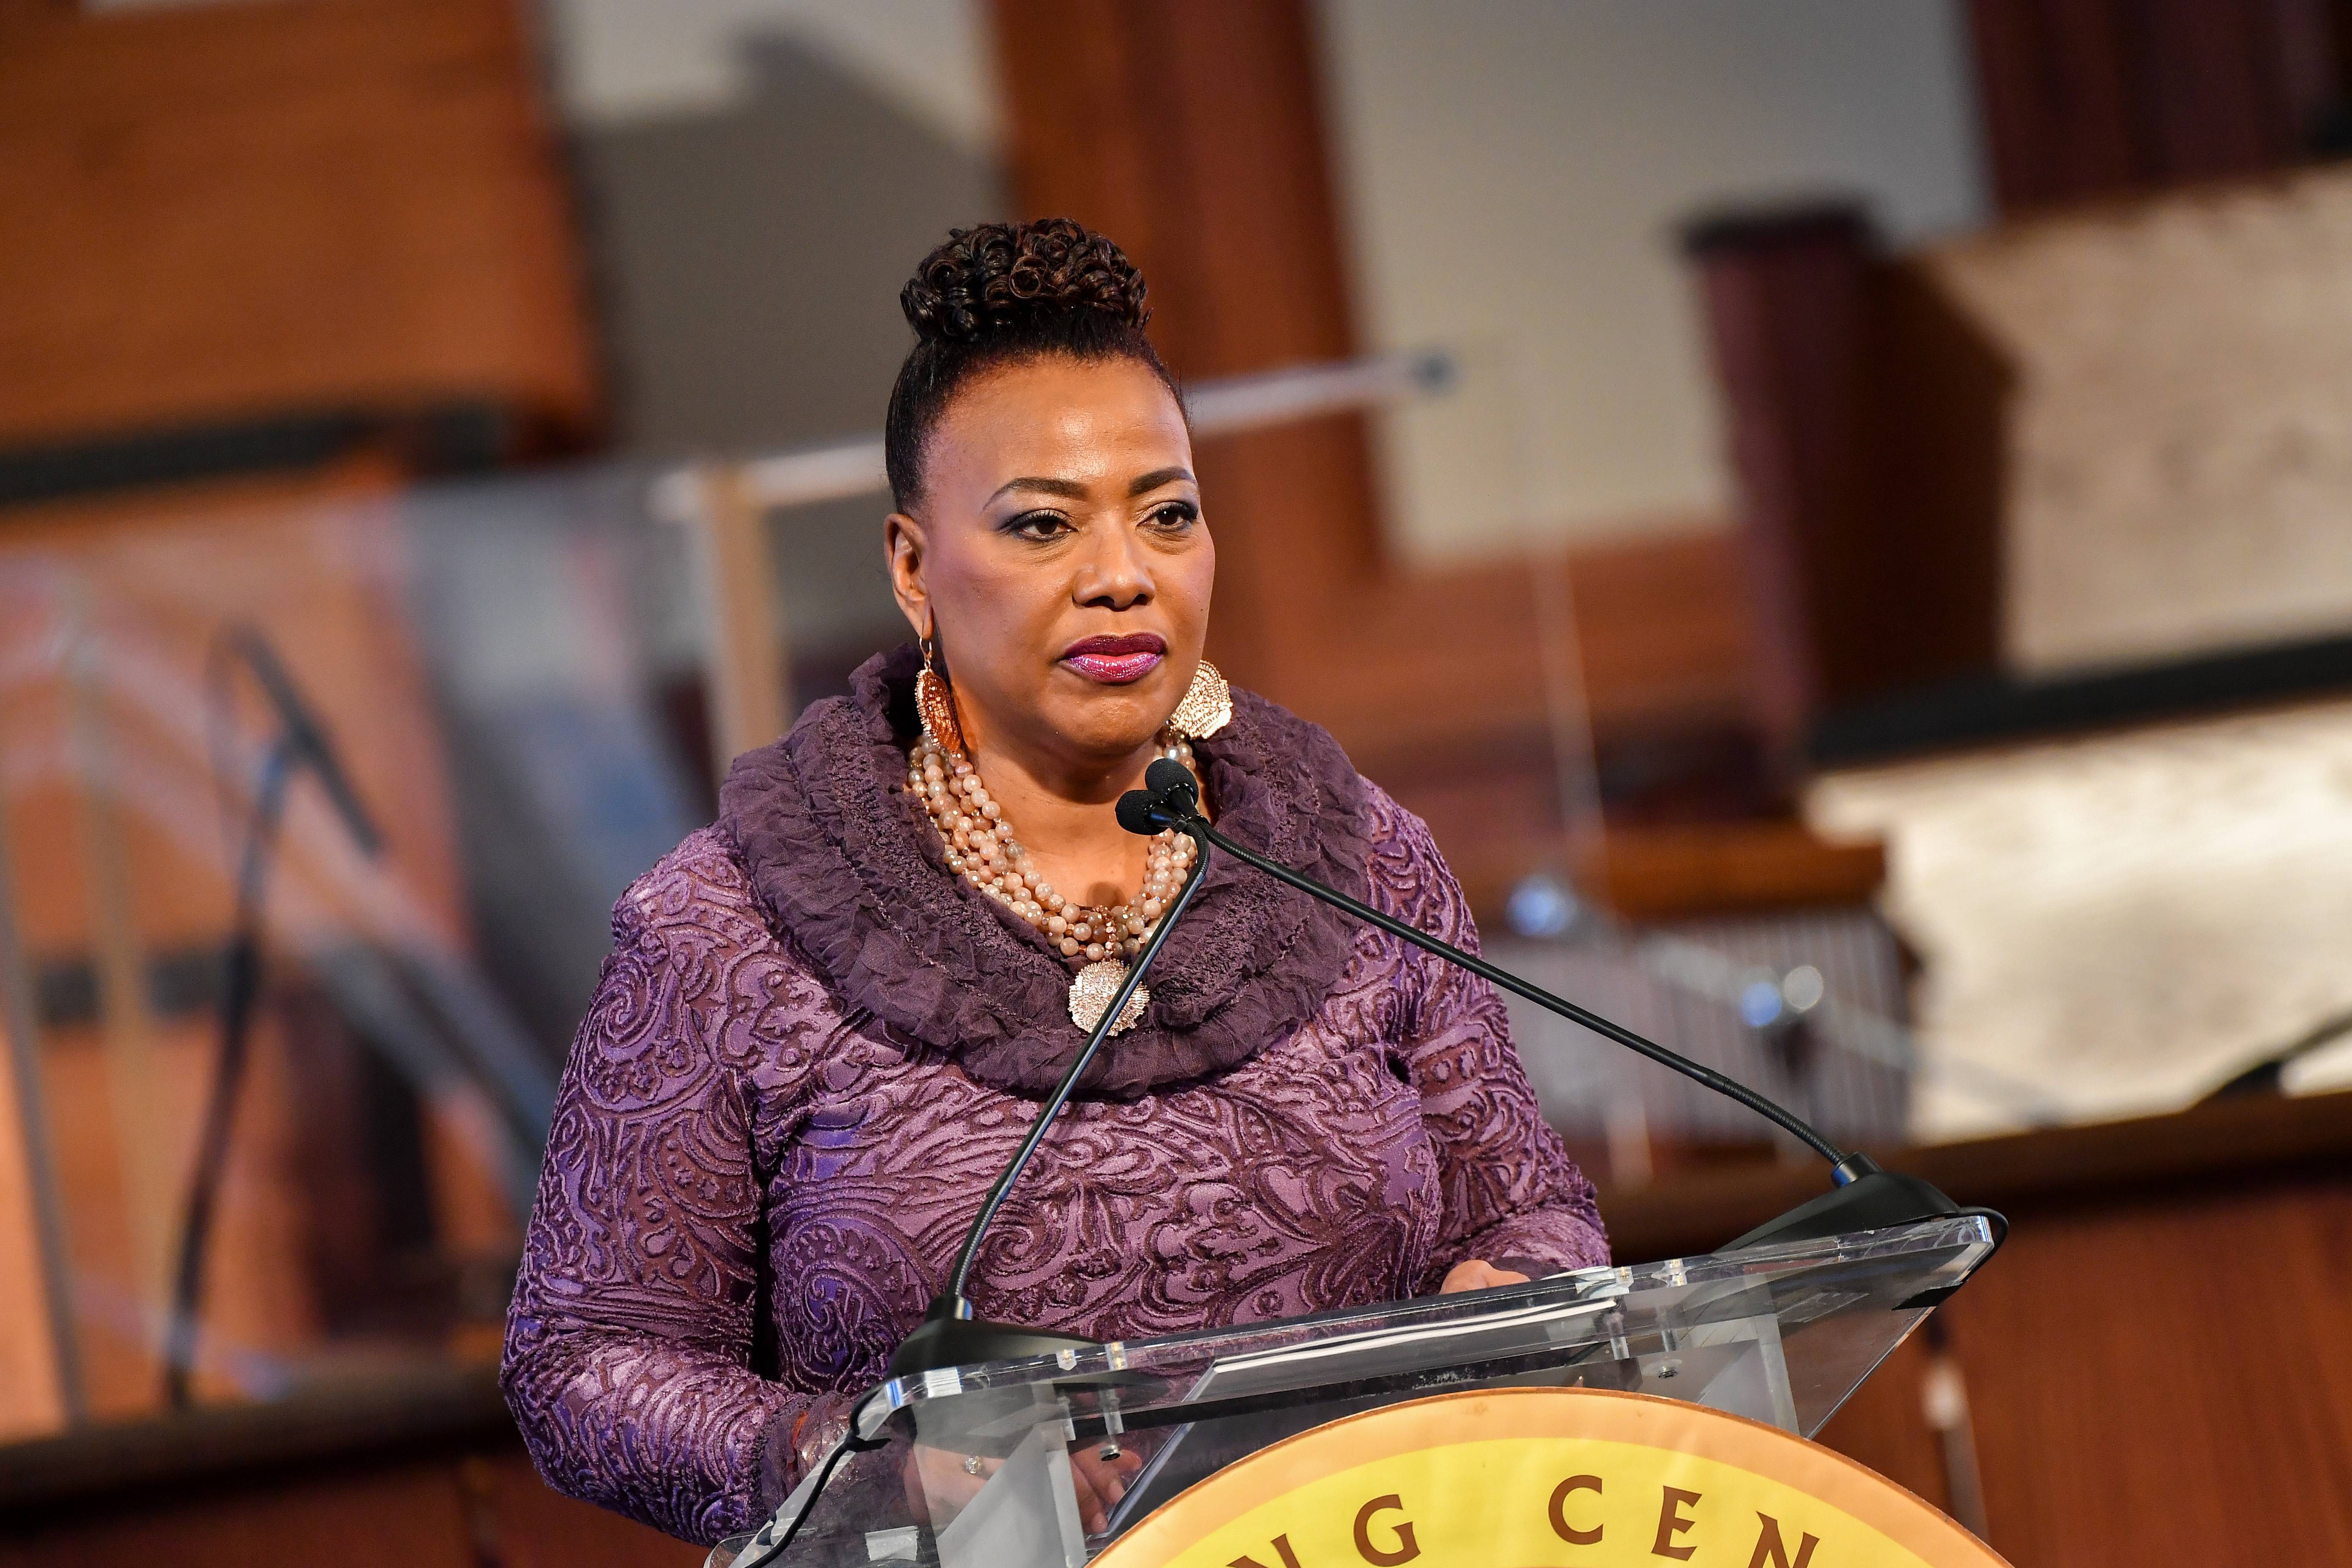 ATLANTA, GEORGIA - JANUARY 18: Dr. Bernice A. King speaks during the 2021 King Holiday Observance Beloved Community Commemorative Service on January 18, 2021 in Atlanta, Georgia. (Photo by Paras Griffin/Getty Images)